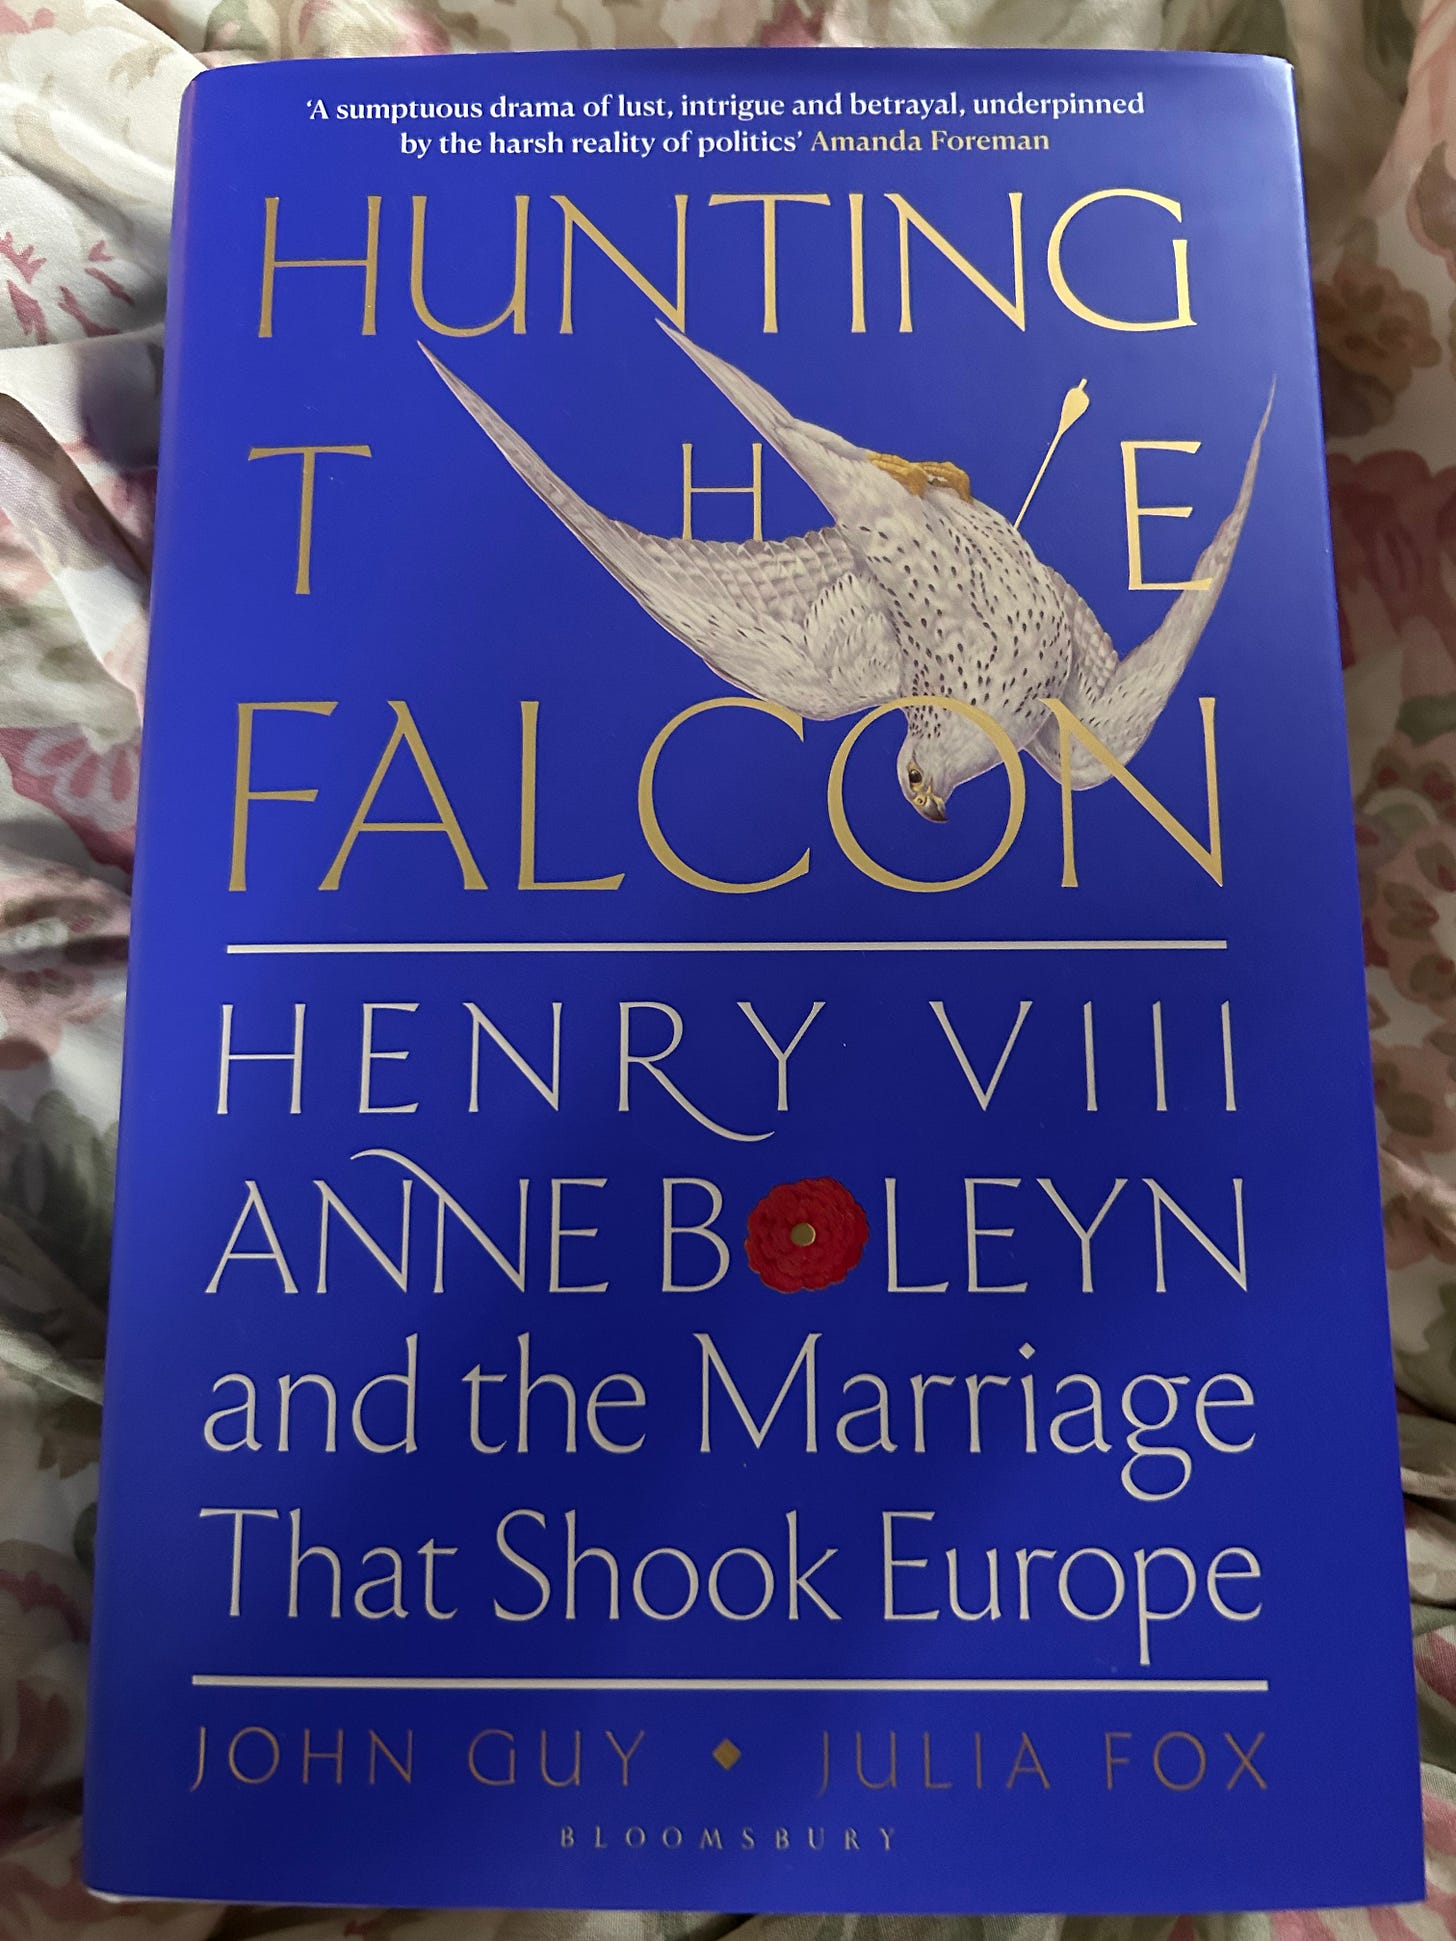 A copy of Hunting the Falcon, a blue hardback, placed on a floral duvet